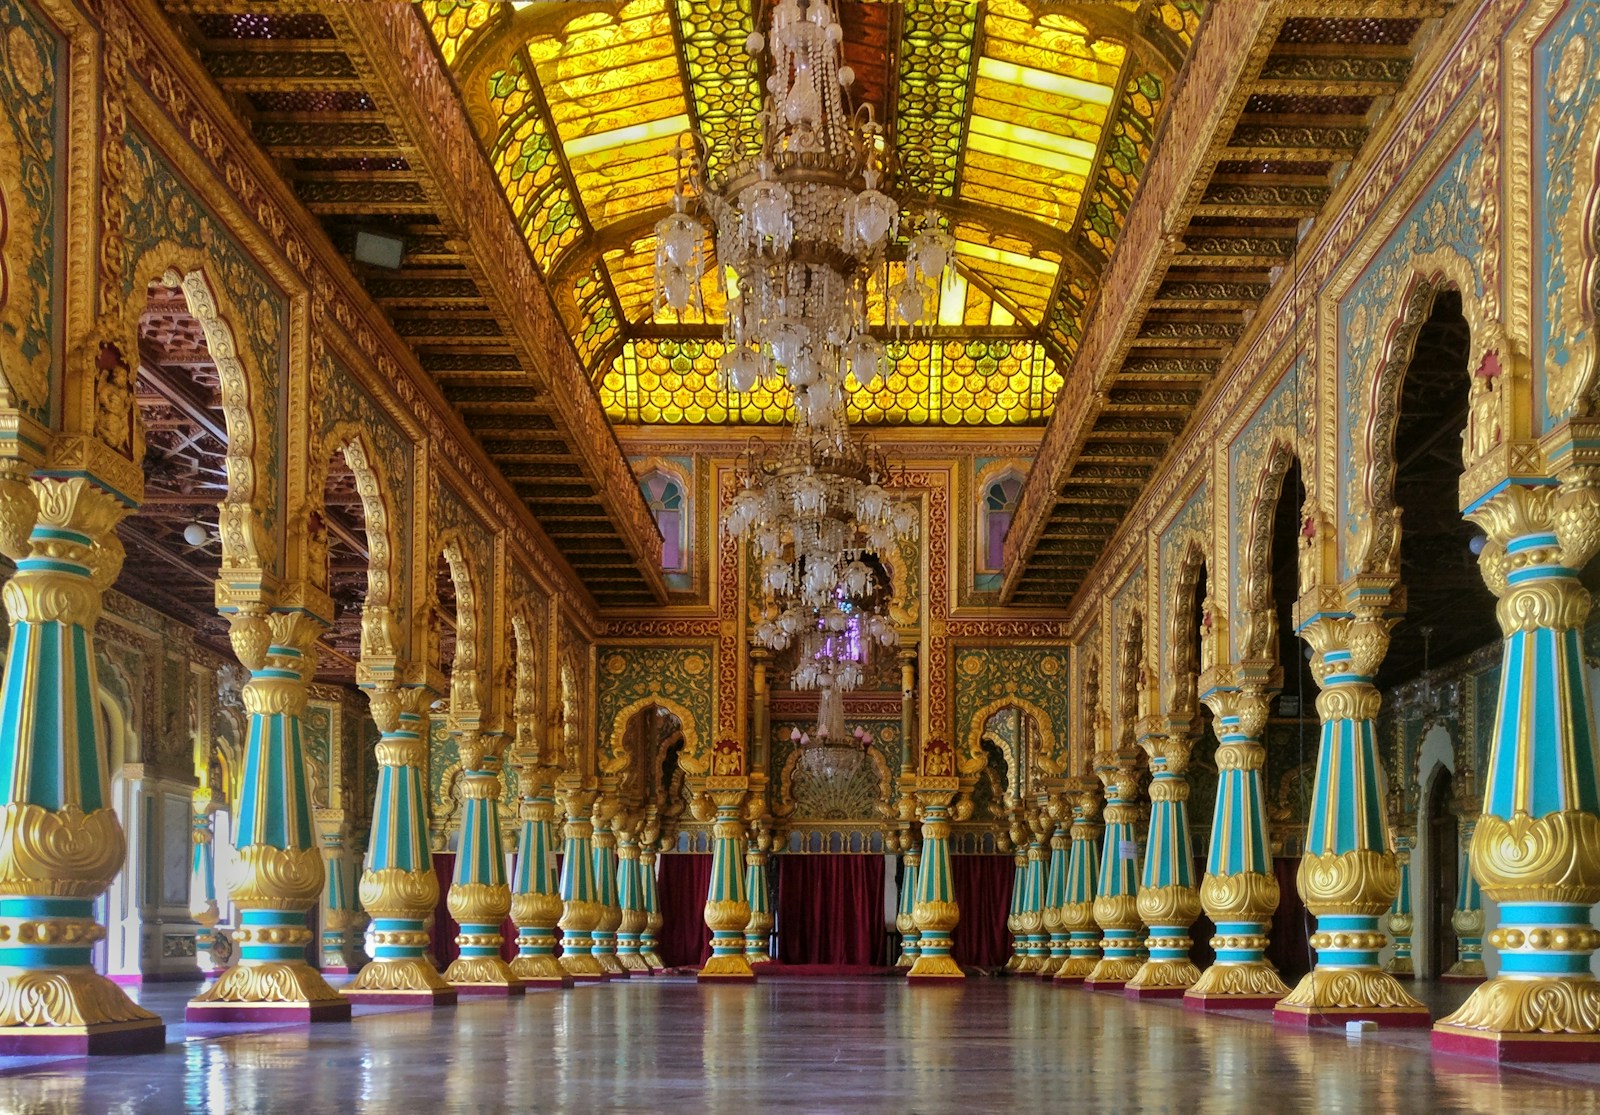 a large ornate room with colorful pillars